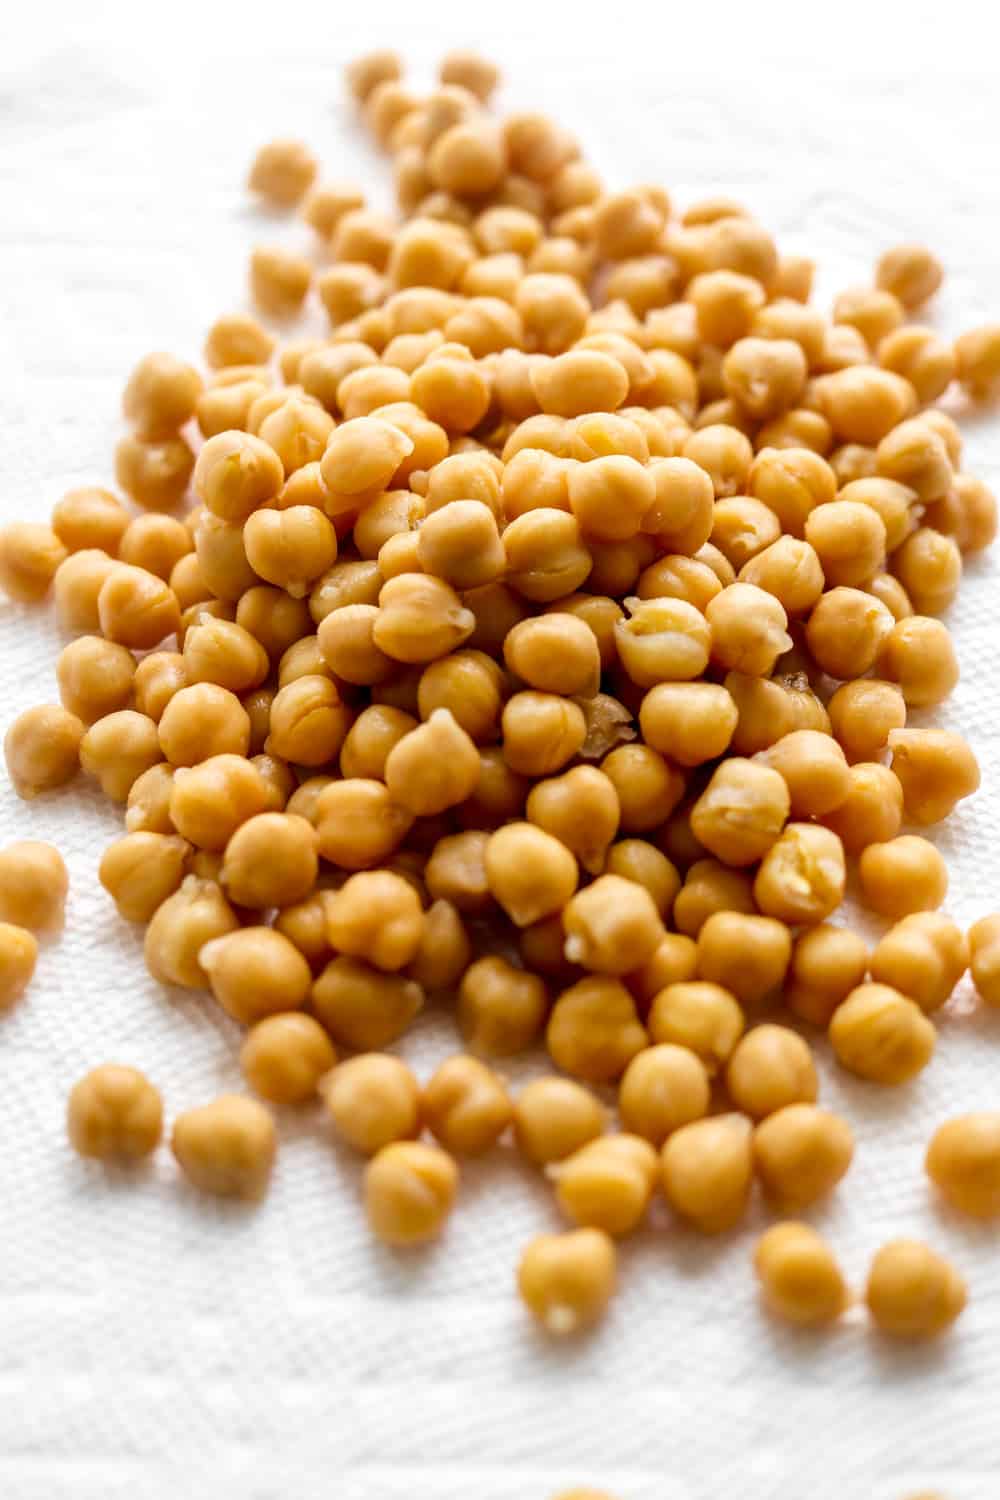 Pile of raw chickpeas on top of white paper towels